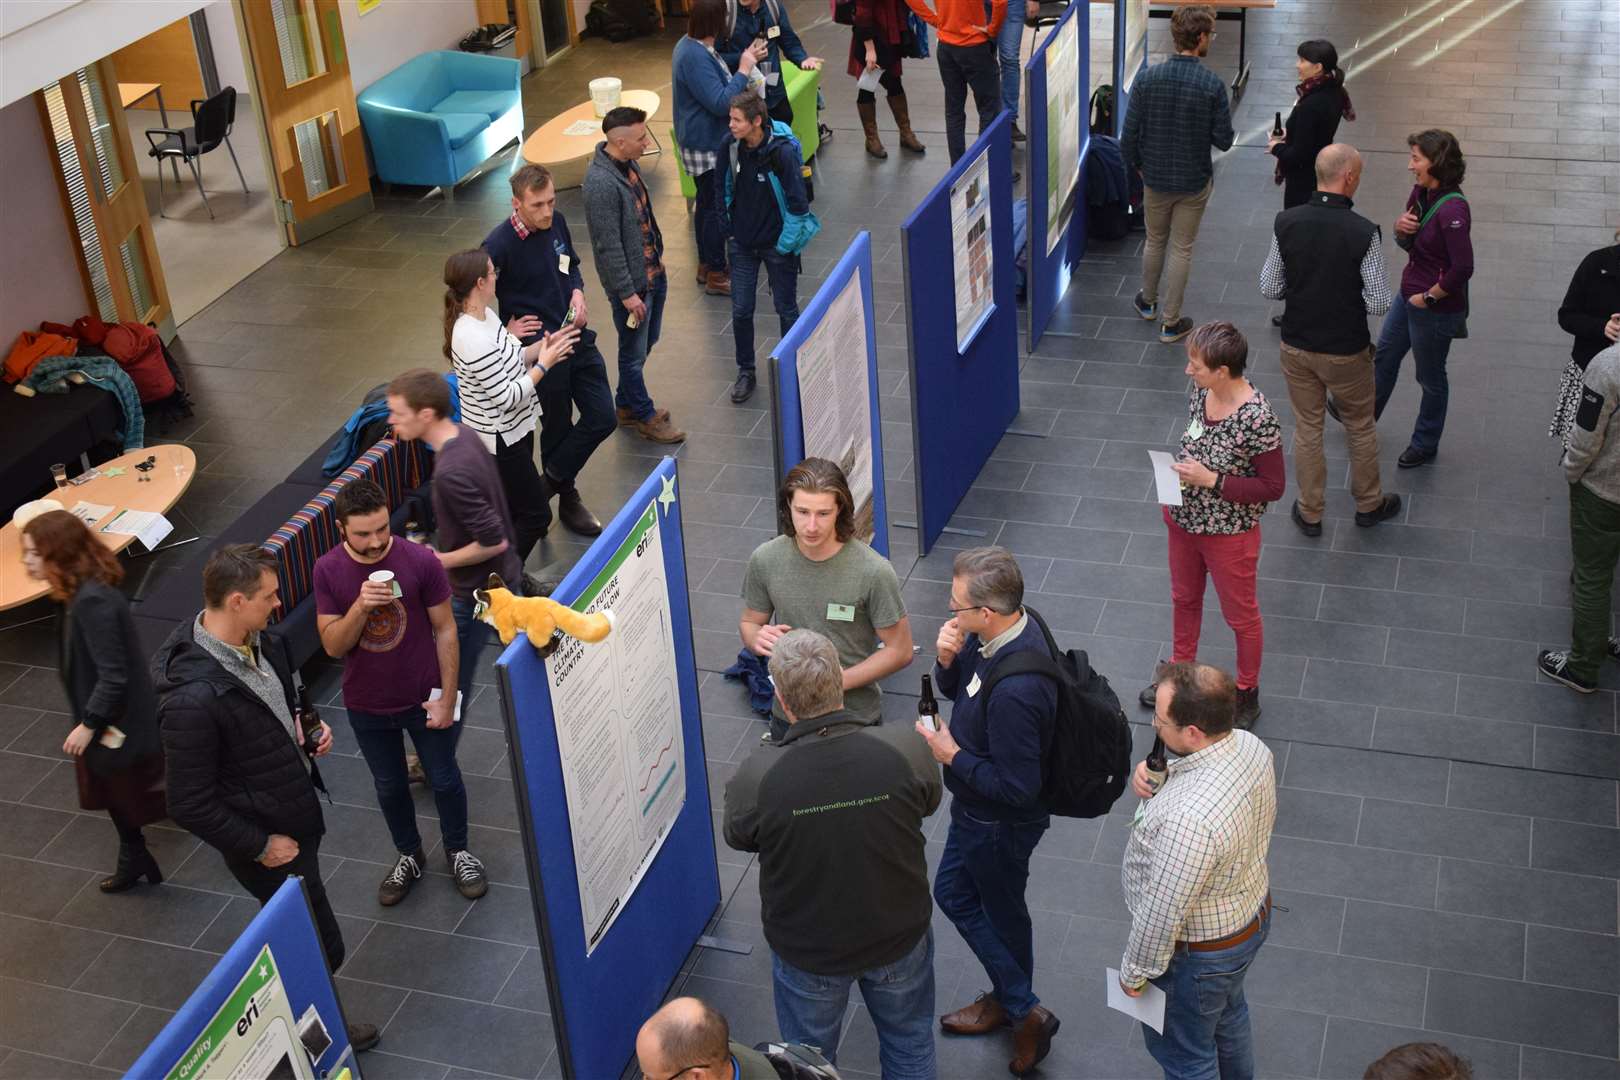 Delegates enjoy networking opportunities at poster session held at UHI North Highland.